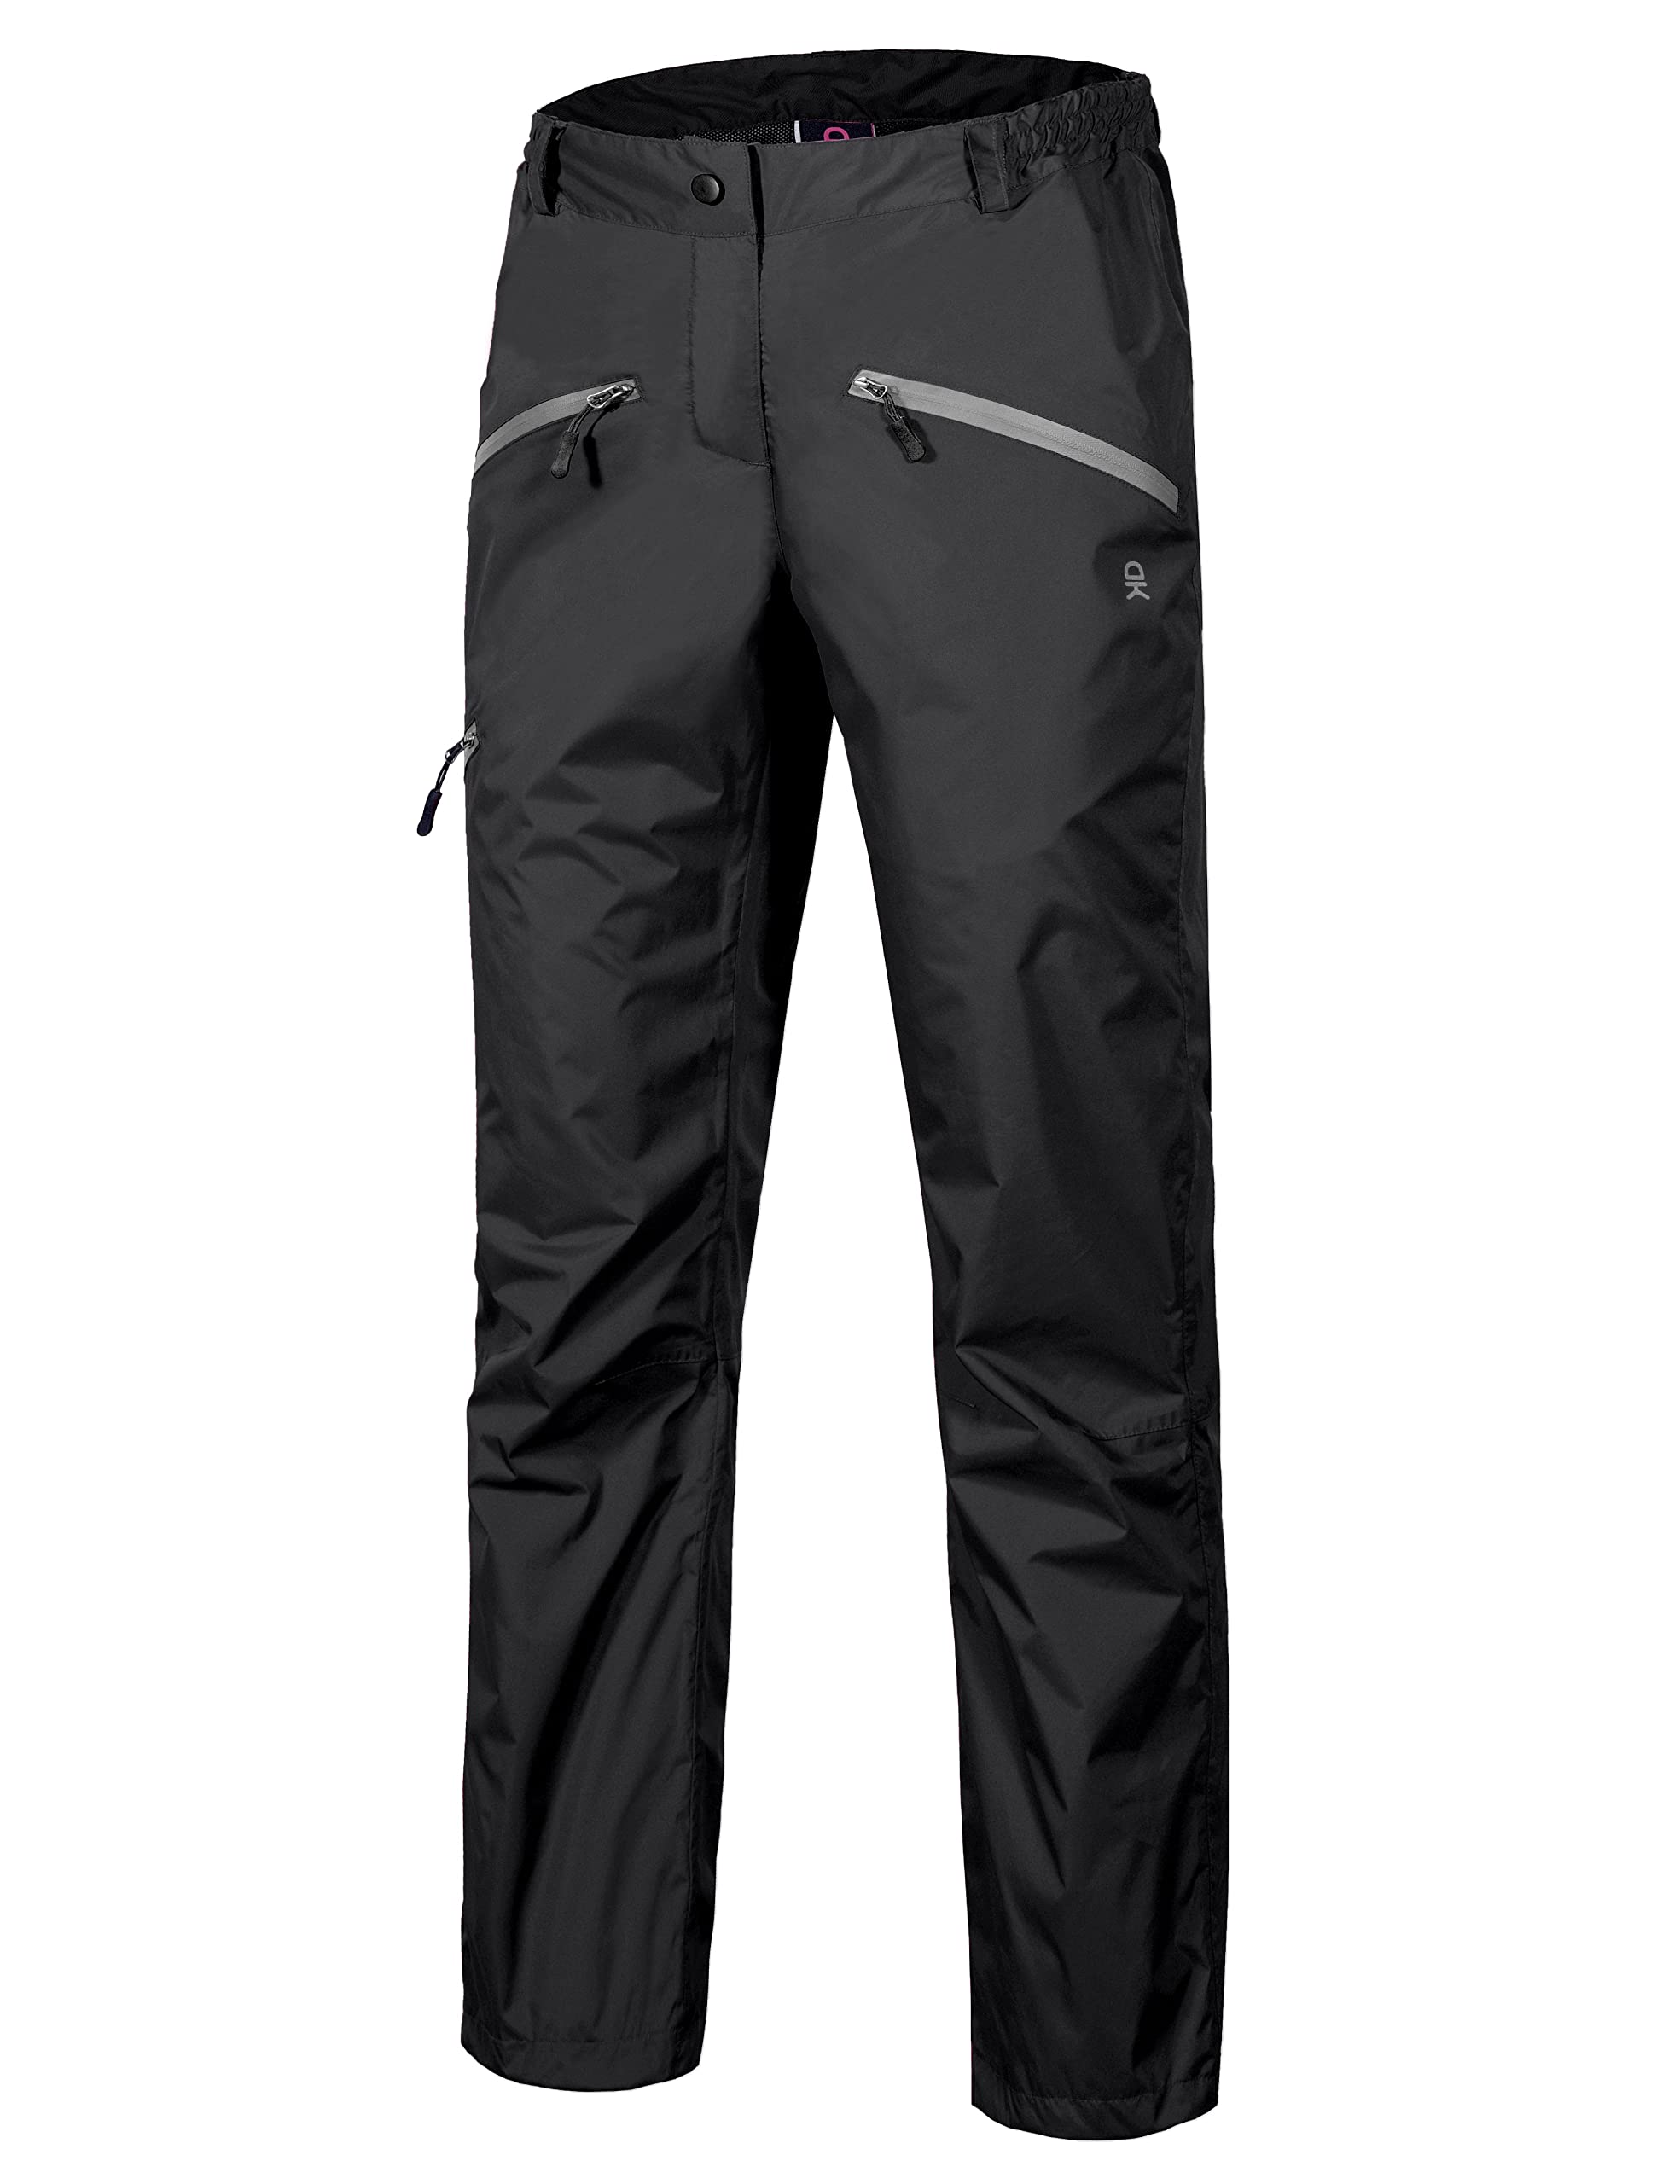 Little Donkey Andy Women's Lightweight Waterproof Rain Pants Breathable  Hiking Pants for Outdoor Fishing A01. Black